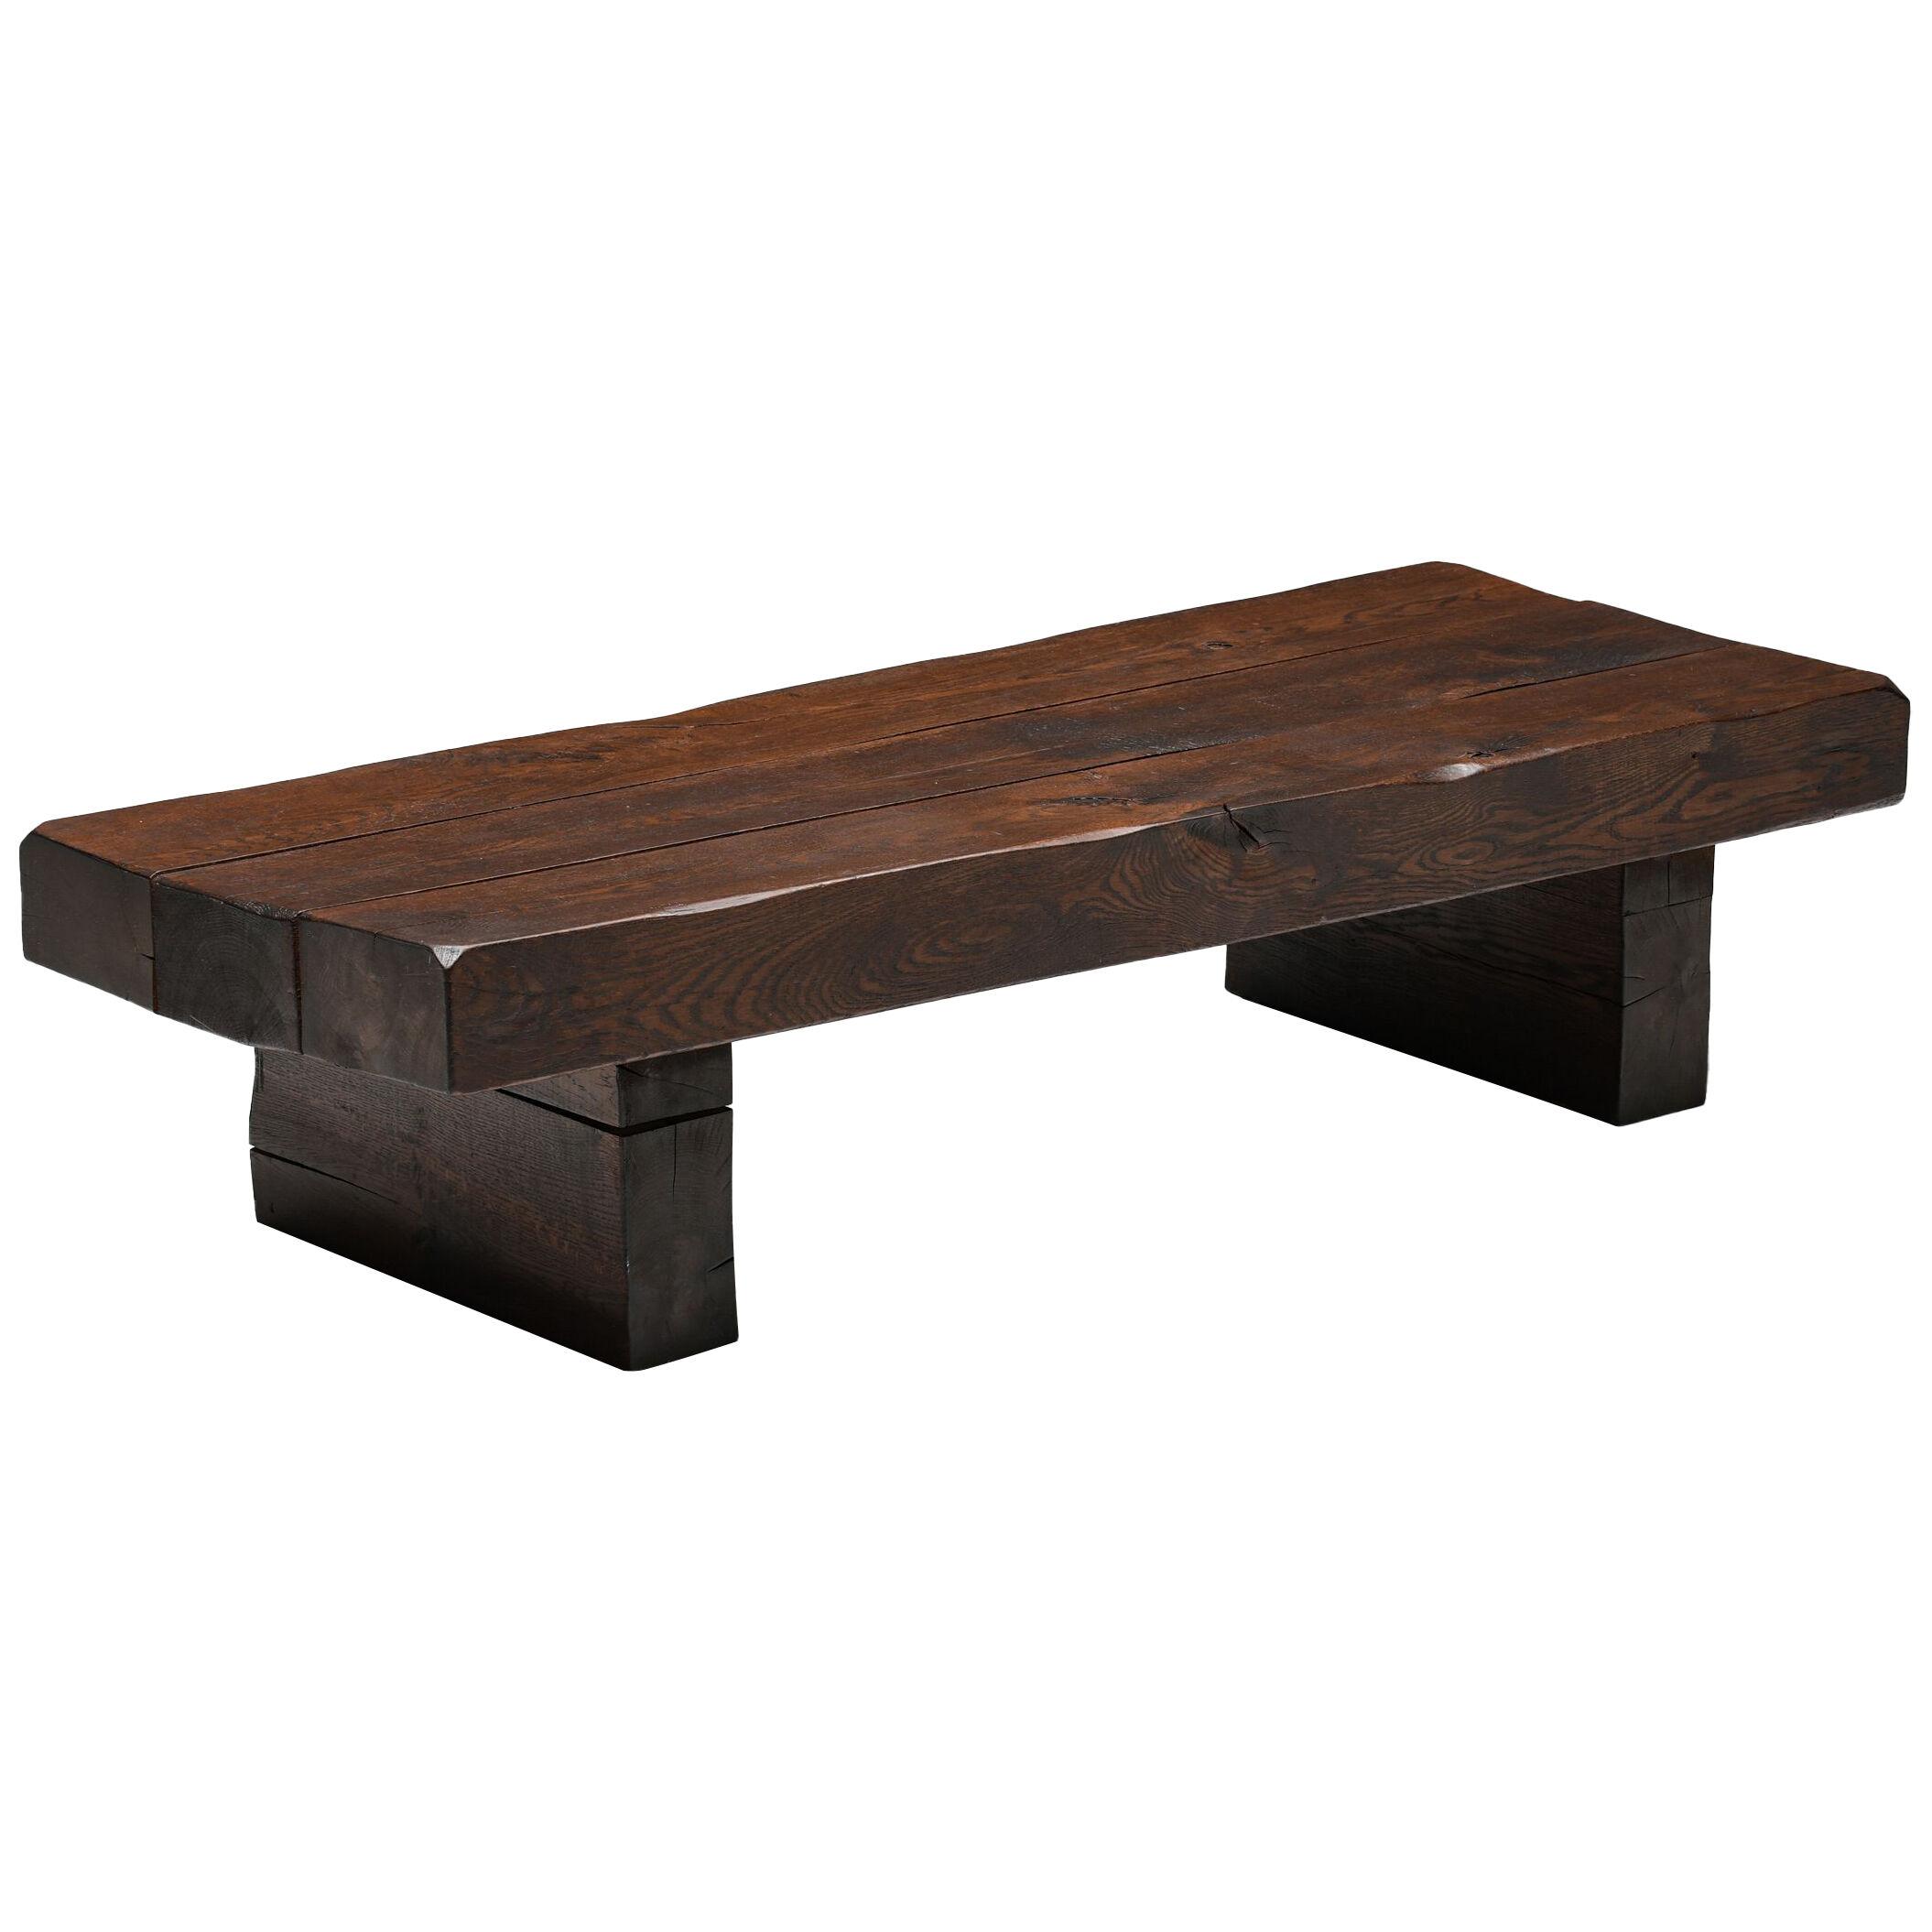 Solid Wood Rustic Coffee Table - 1920's